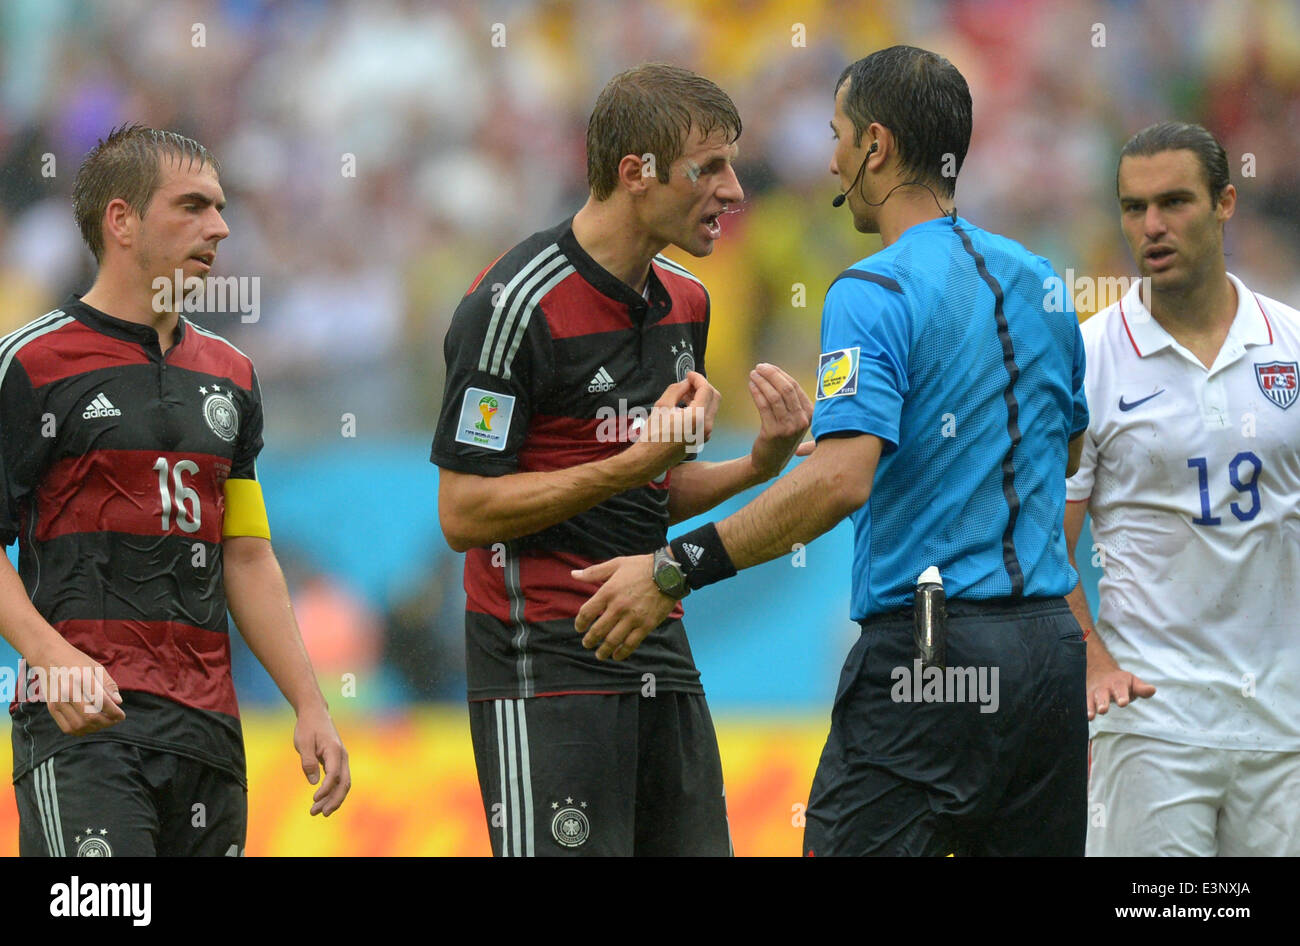 Recife, Brazil. 26th June, 2014. Germany's Philipp Lahm (L) and Thomas Mueller argue with referee Abduxamidullo Rasulov of Uzbekistan as Graham Zusi of the US looks on during the FIFA World Cup group G preliminary round match between the USA and Germany at Arena Pernambuco in Recife, Brazil, 26 June 2014. Photo: Thomas Eisenhuth/dpa/Alamy Live News Stock Photo